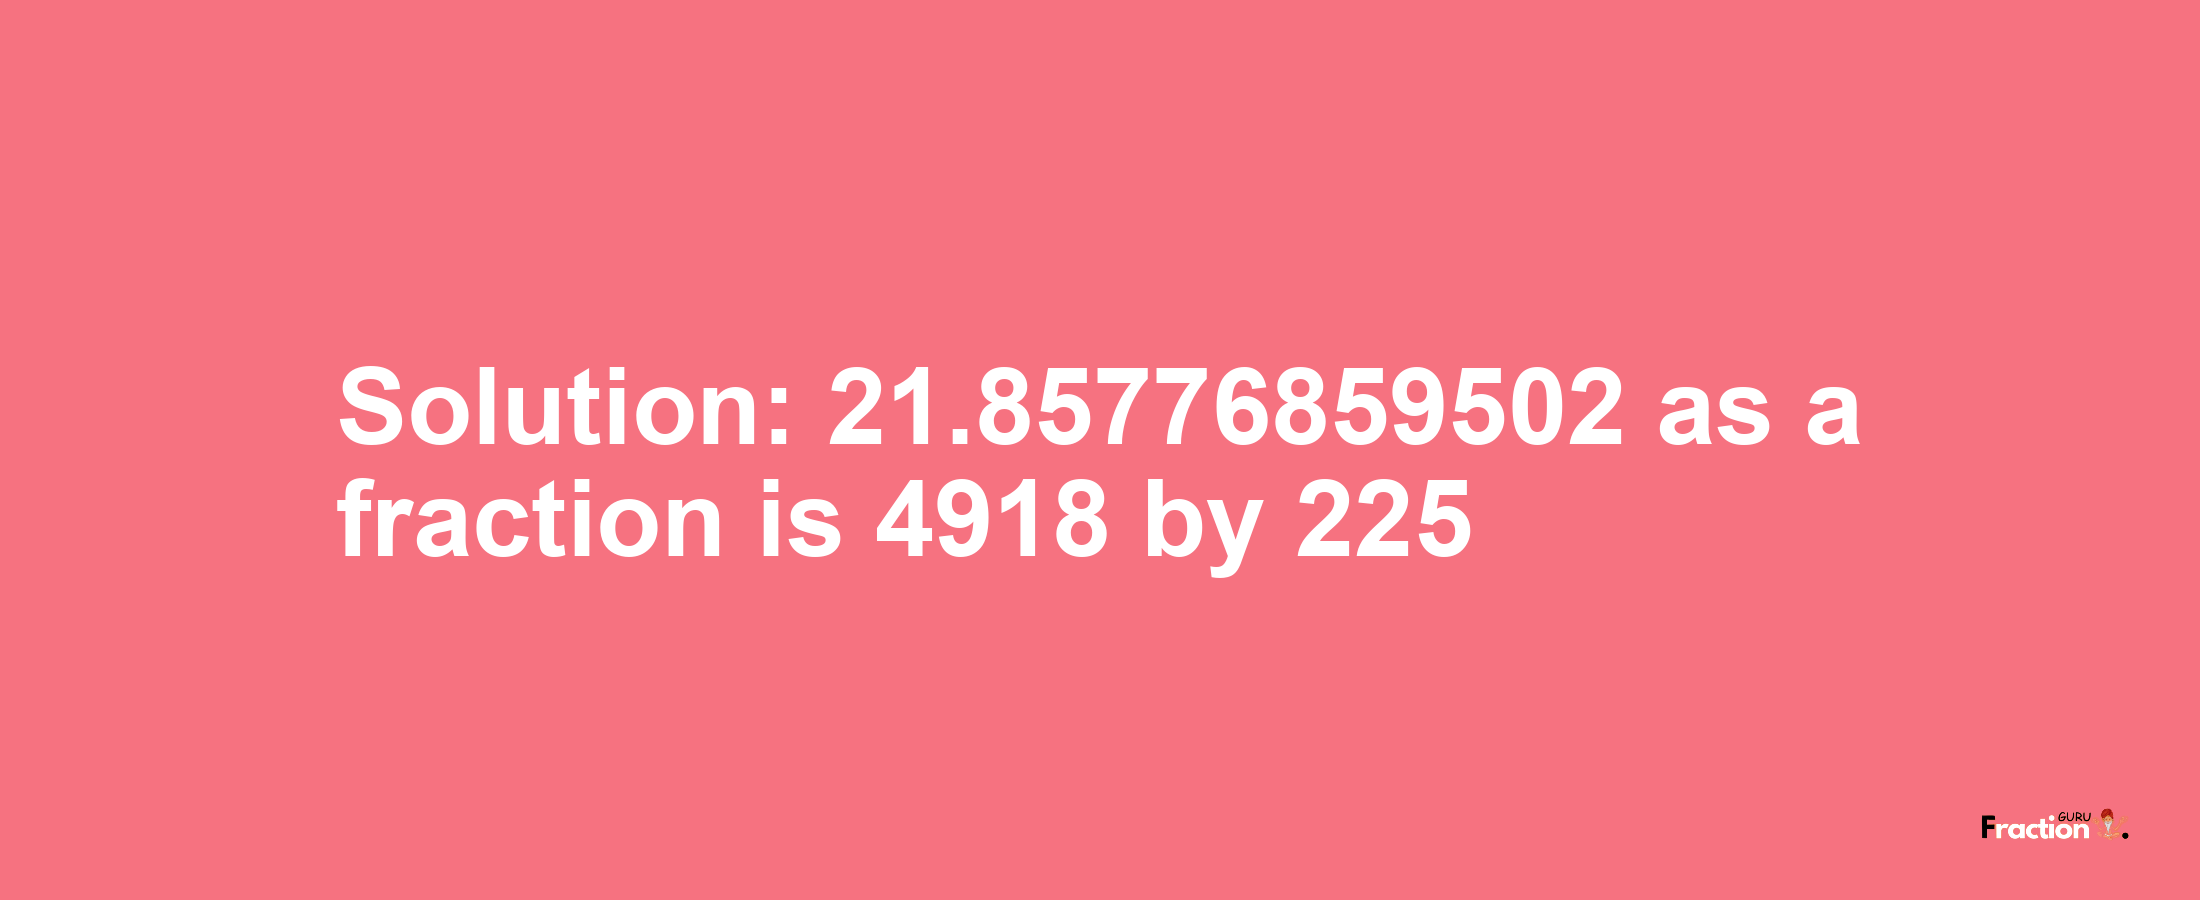 Solution:21.85776859502 as a fraction is 4918/225